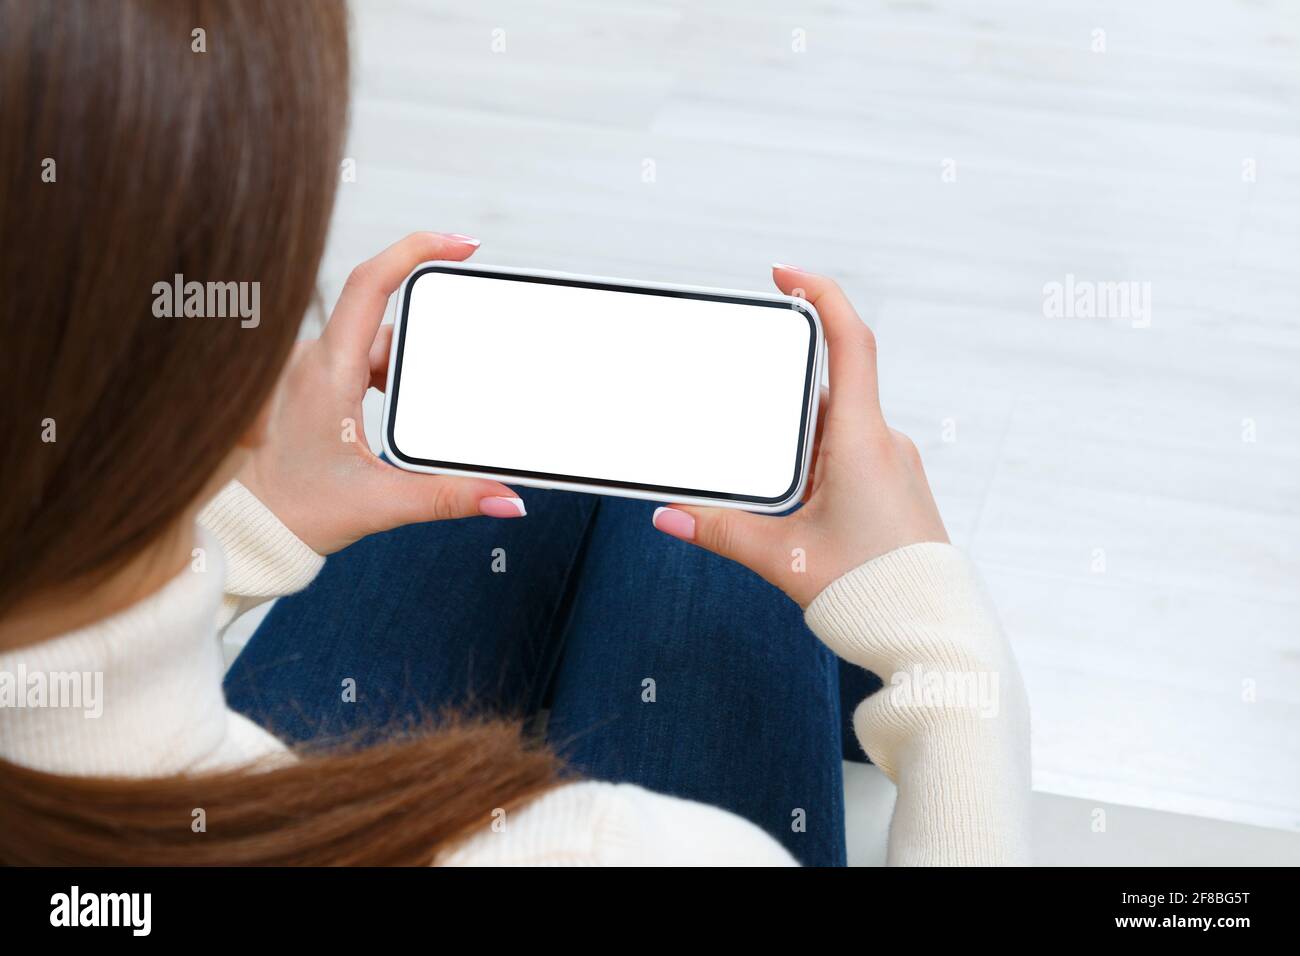 Rear view of girl using phone with white blank screen mockup. Lifestyle concept with digital technology. Stock Photo